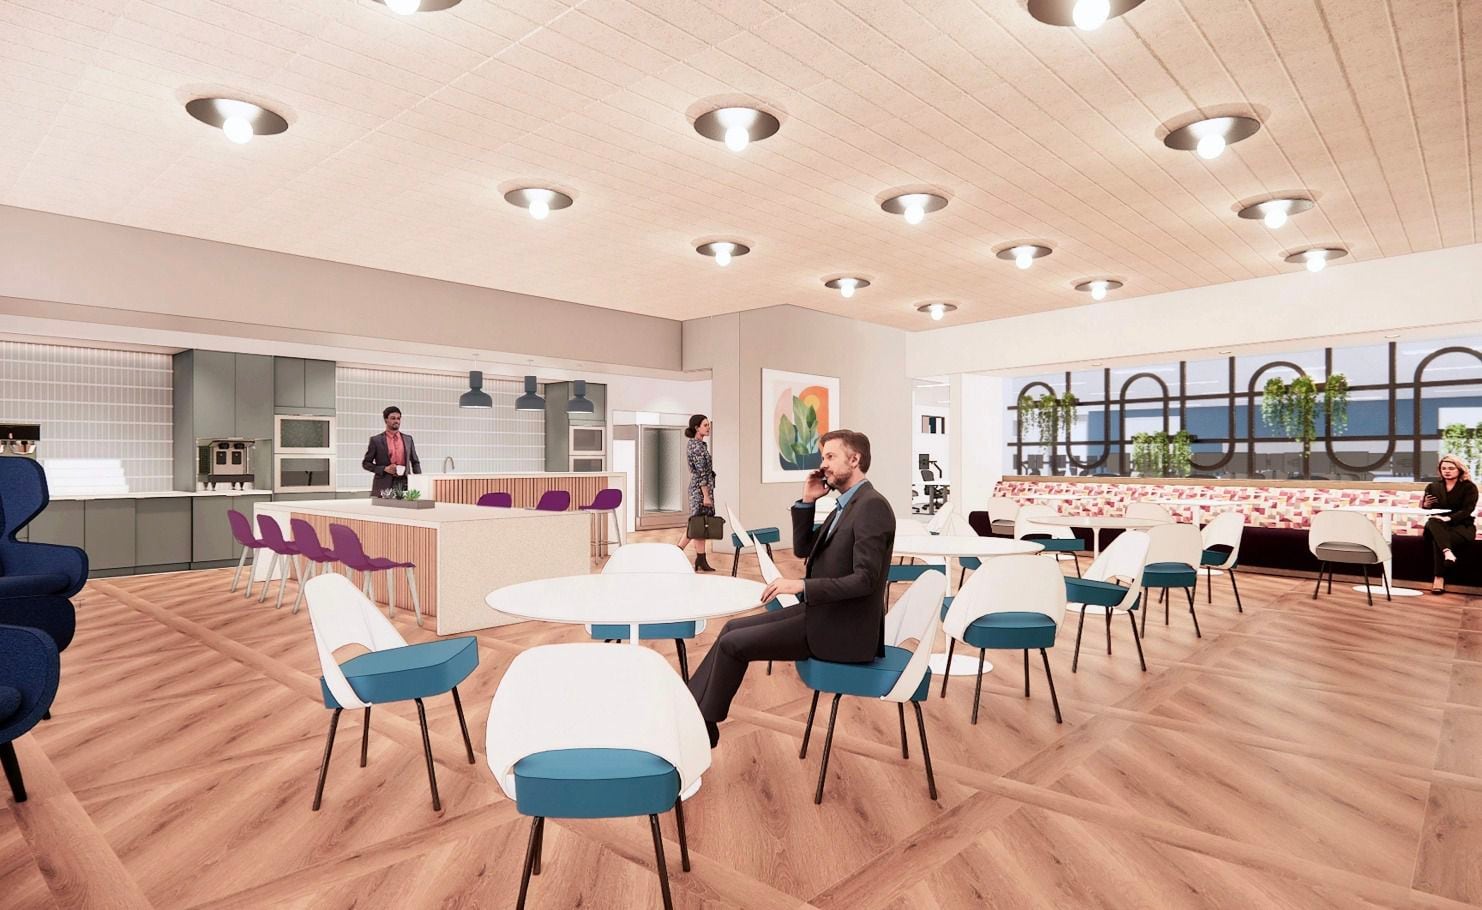 Rendering of the A2 work cafe